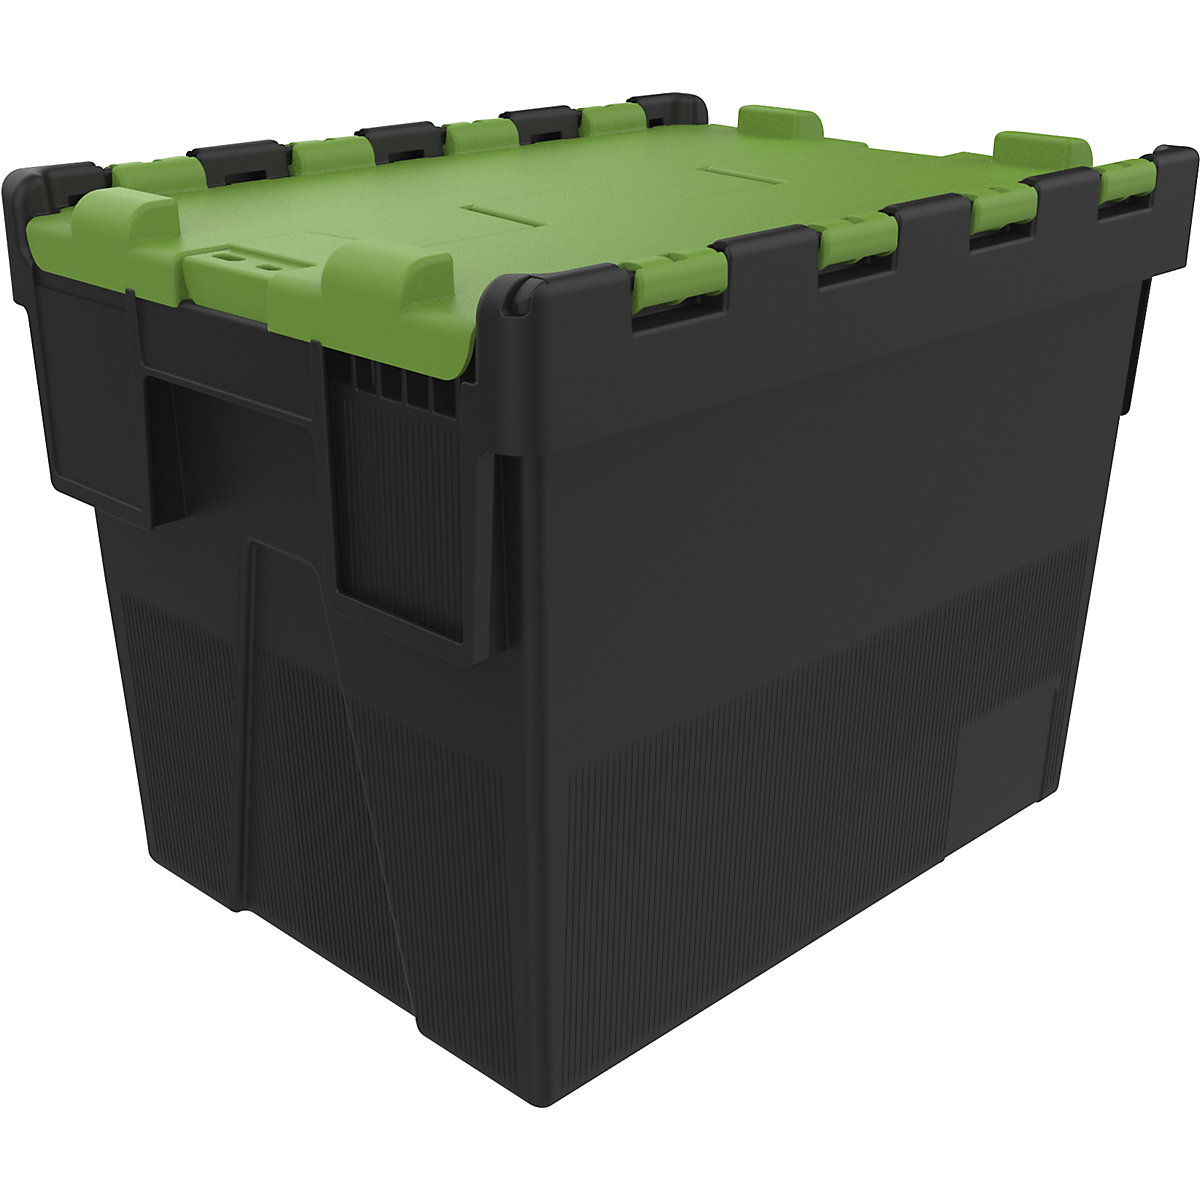 Reusable stacking container, LxWxH 400 x 300 x 306 mm, black/green-5